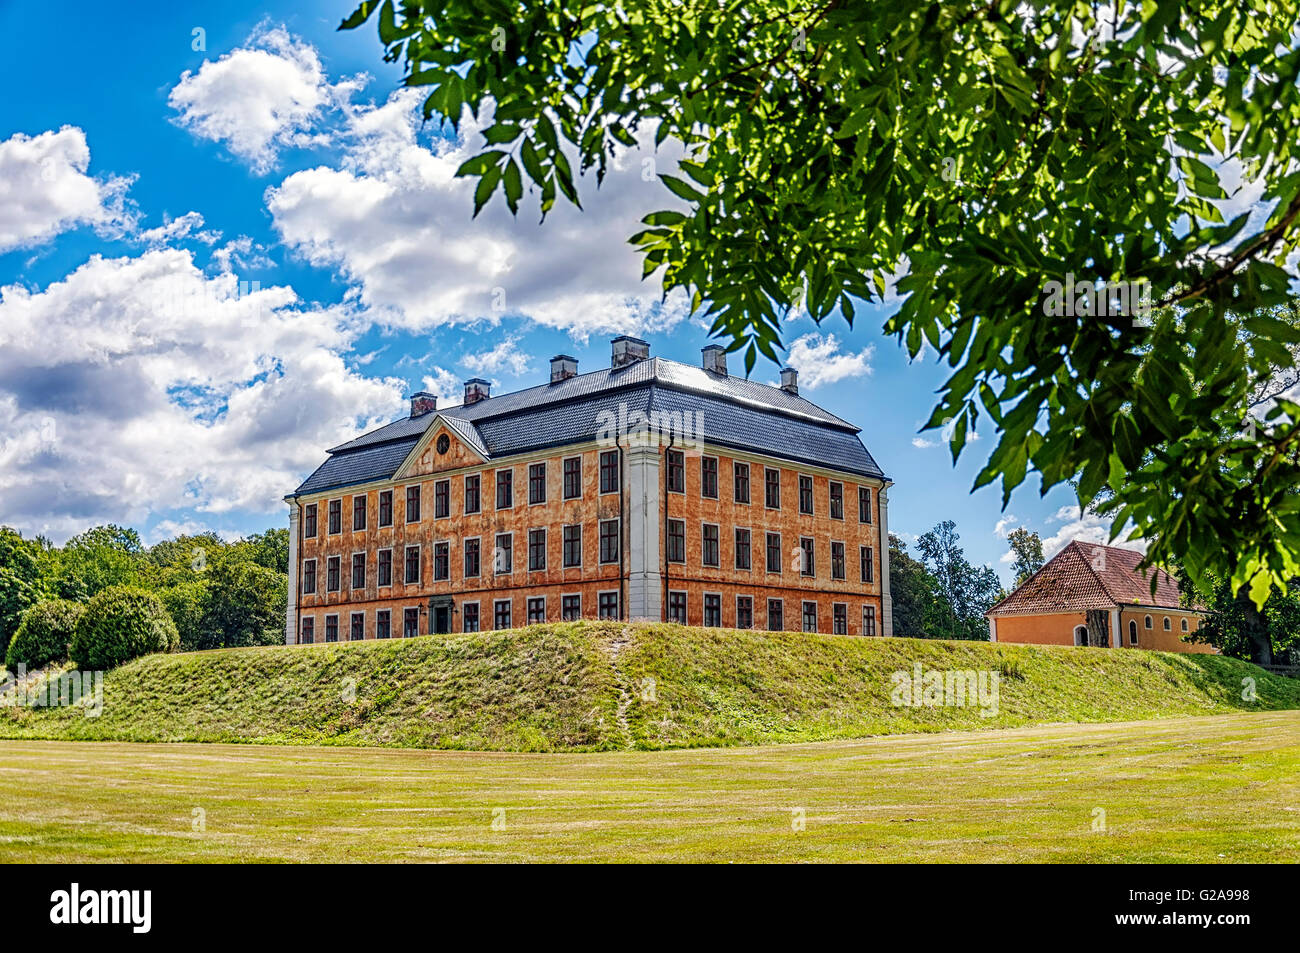 An image of the majestic Christinehof castle in the Skane region of Sweden. Stock Photo